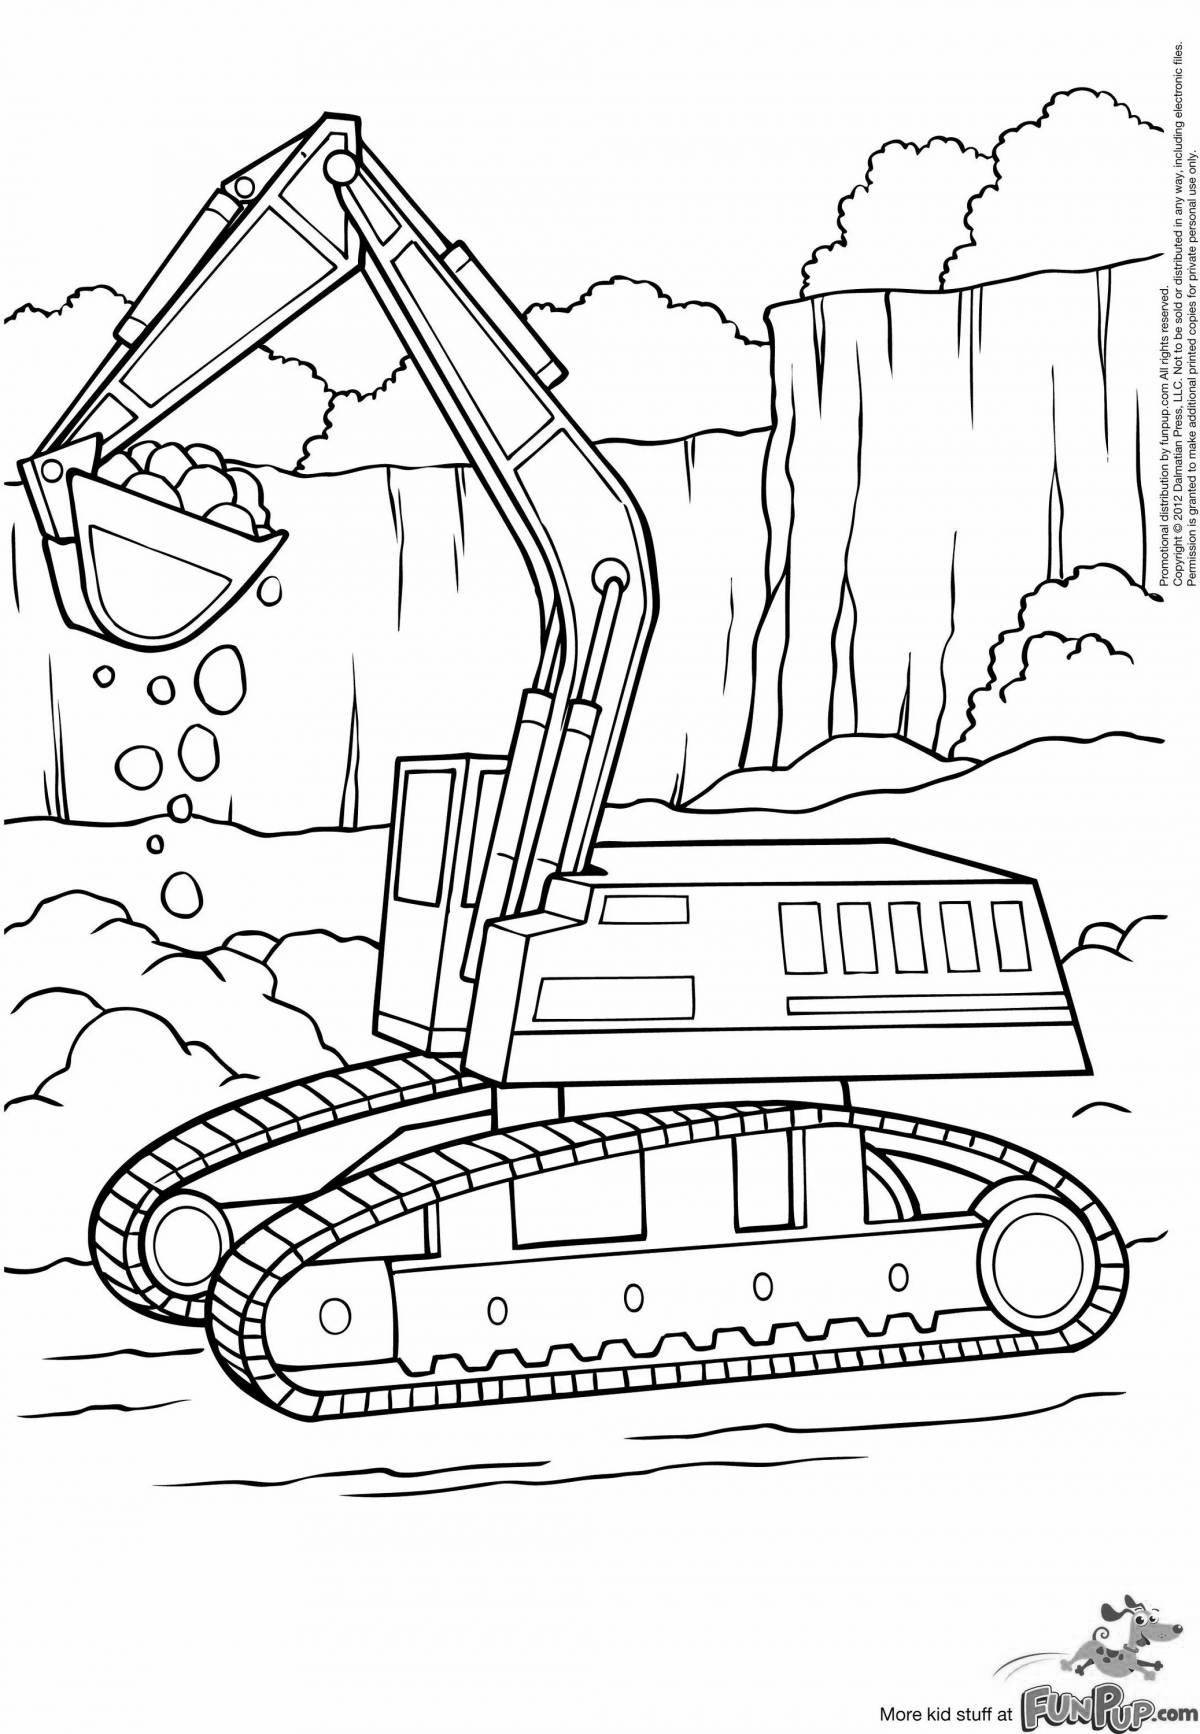 Great construction vehicles coloring pages for boys